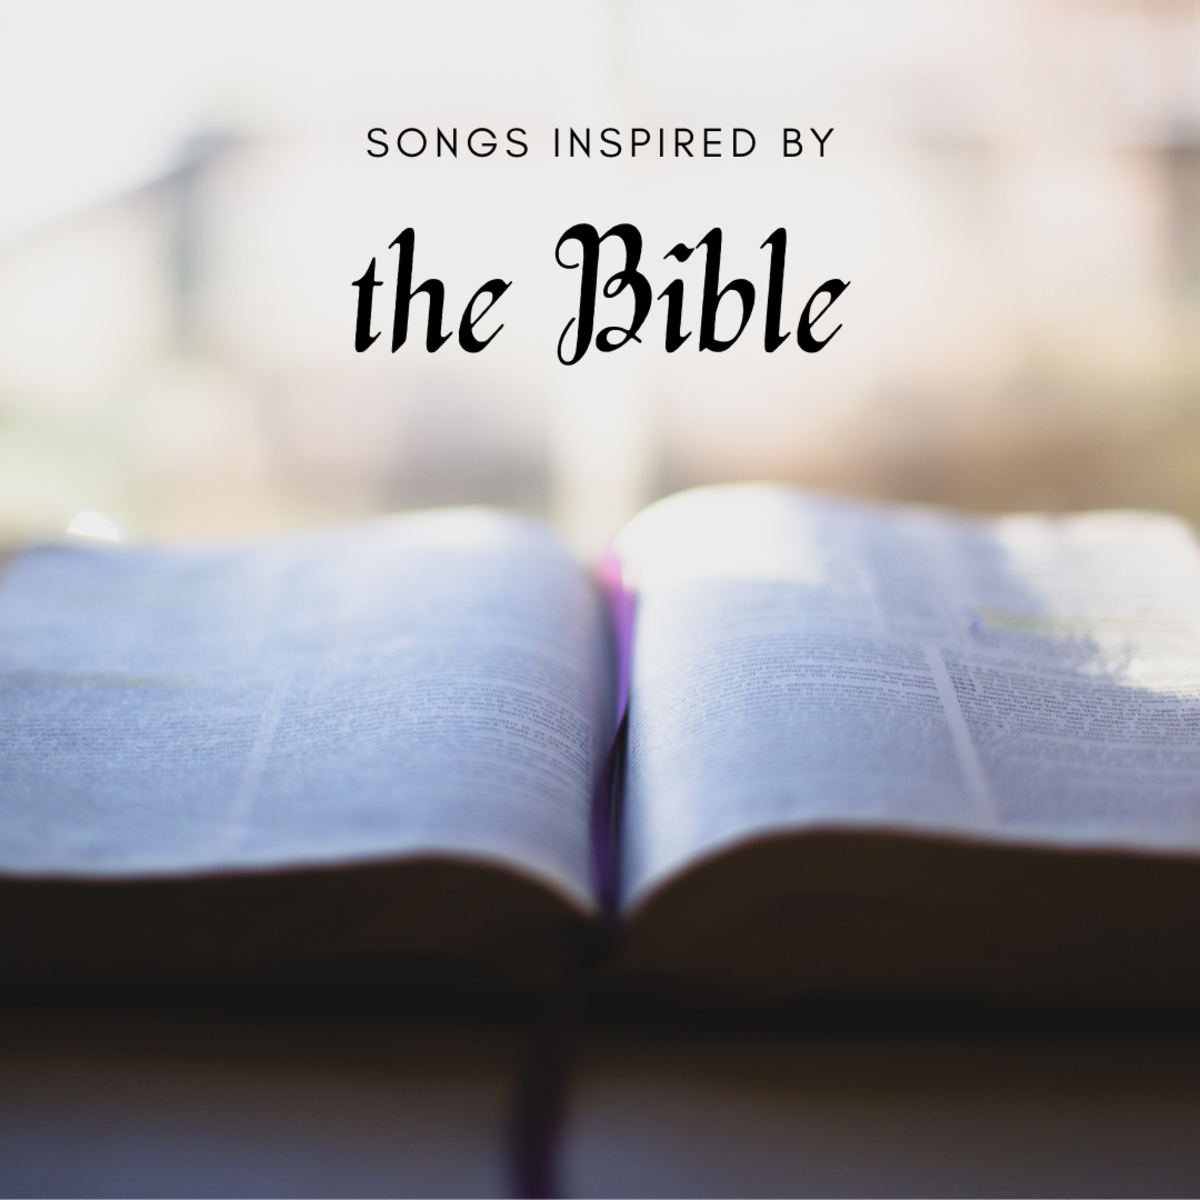 10 Songs Inspired by the Bible